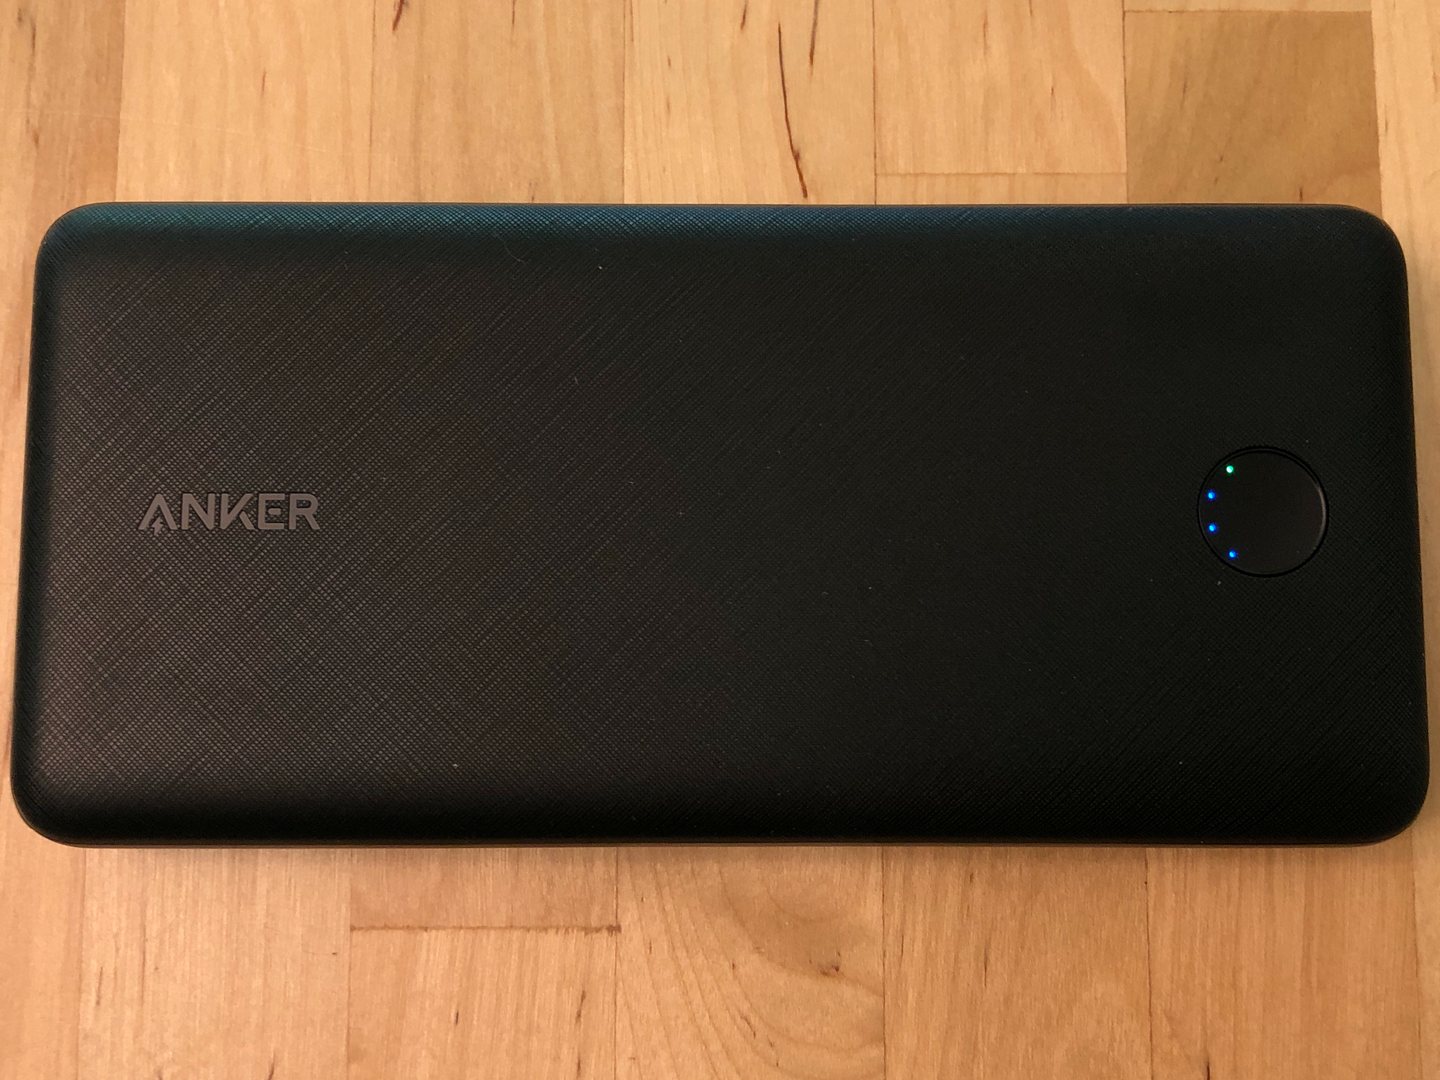 what-does-green-light-mean-on-anker-power-bank